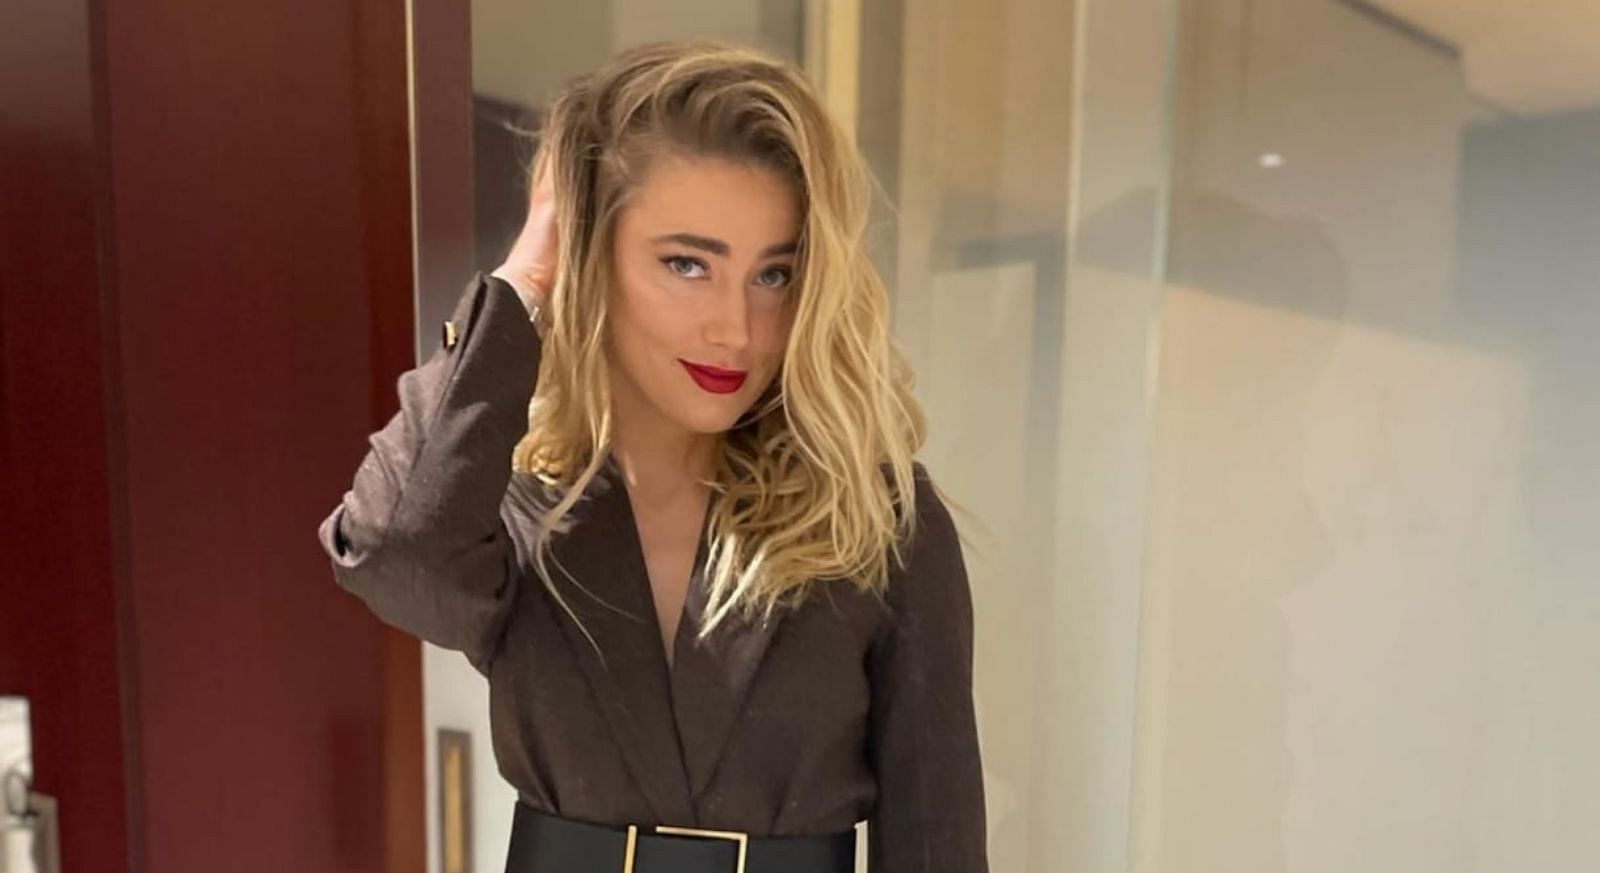 Who is Amber Heard dating now?